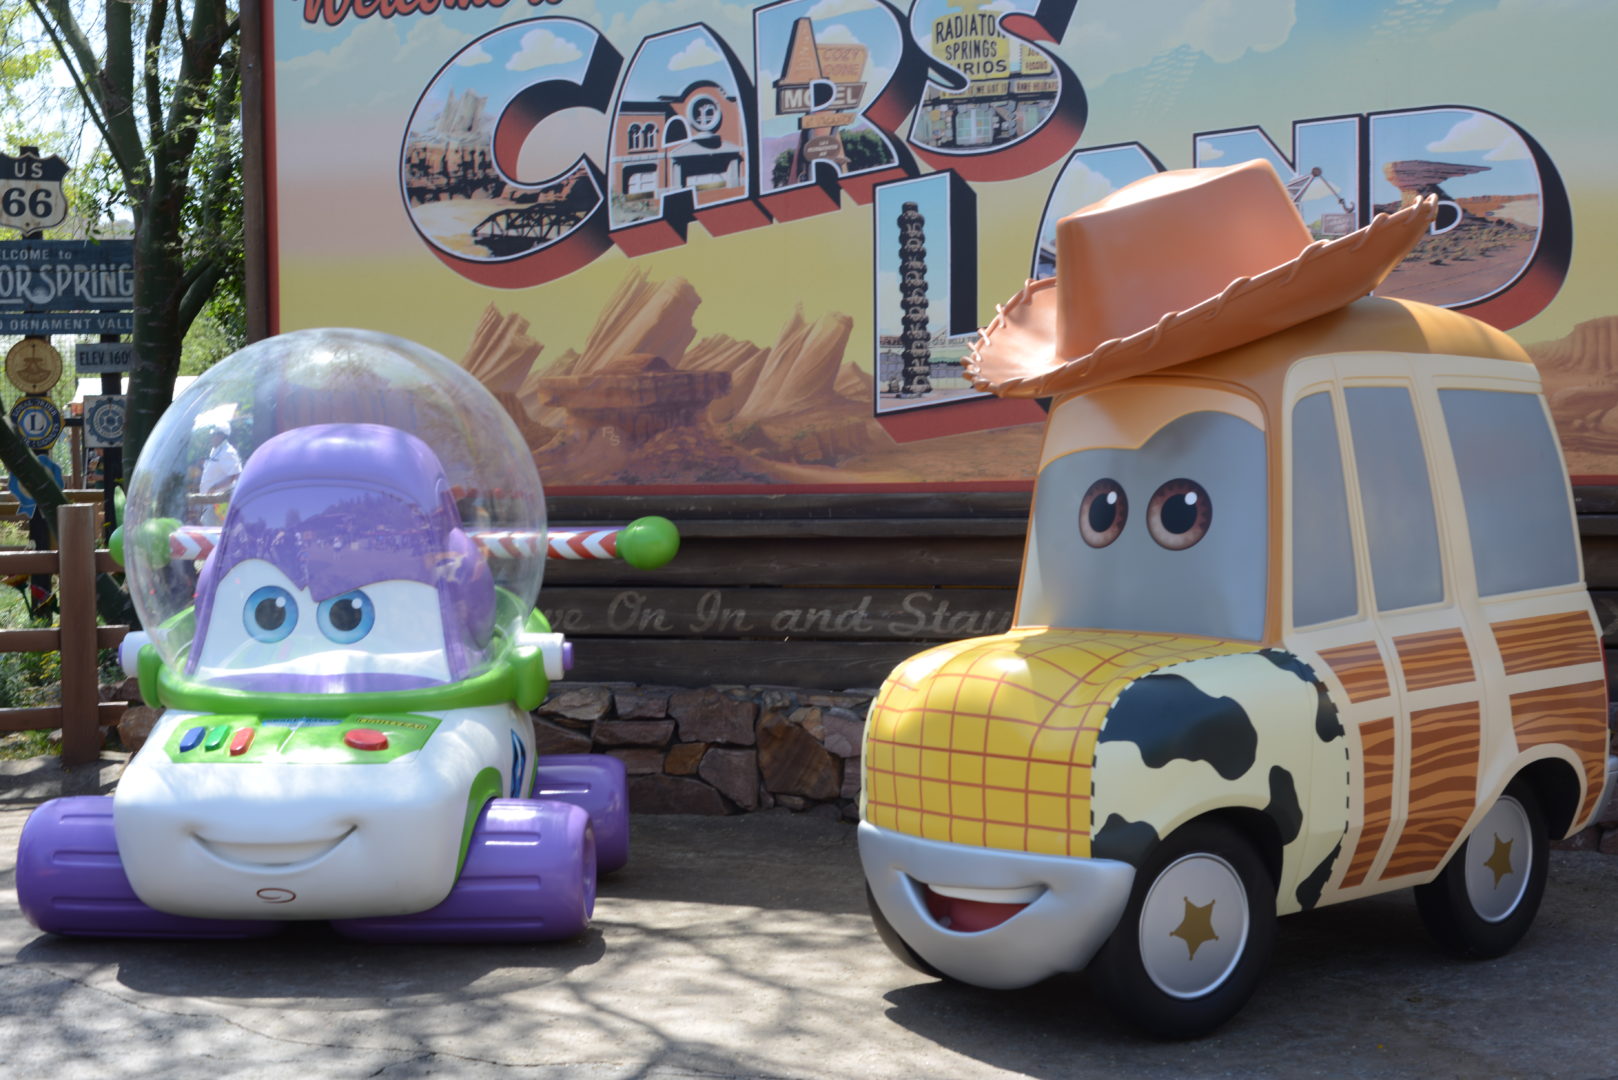 Buzz and Woody Cars Land PhotoPass Entrance Dressed Up for Disneyland's Pixar Fest